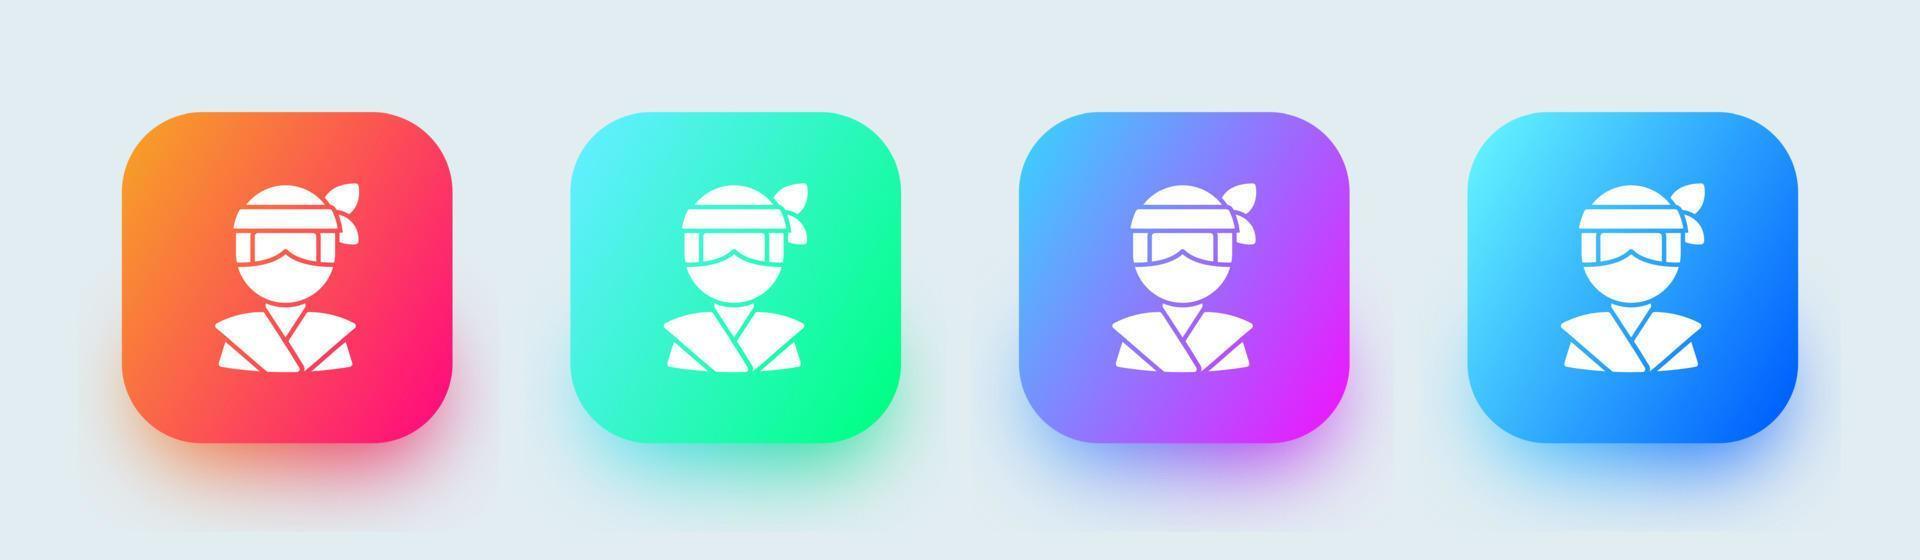 Ninja solid icon in square gradient colors. Japanese warrior signs vector illustration.